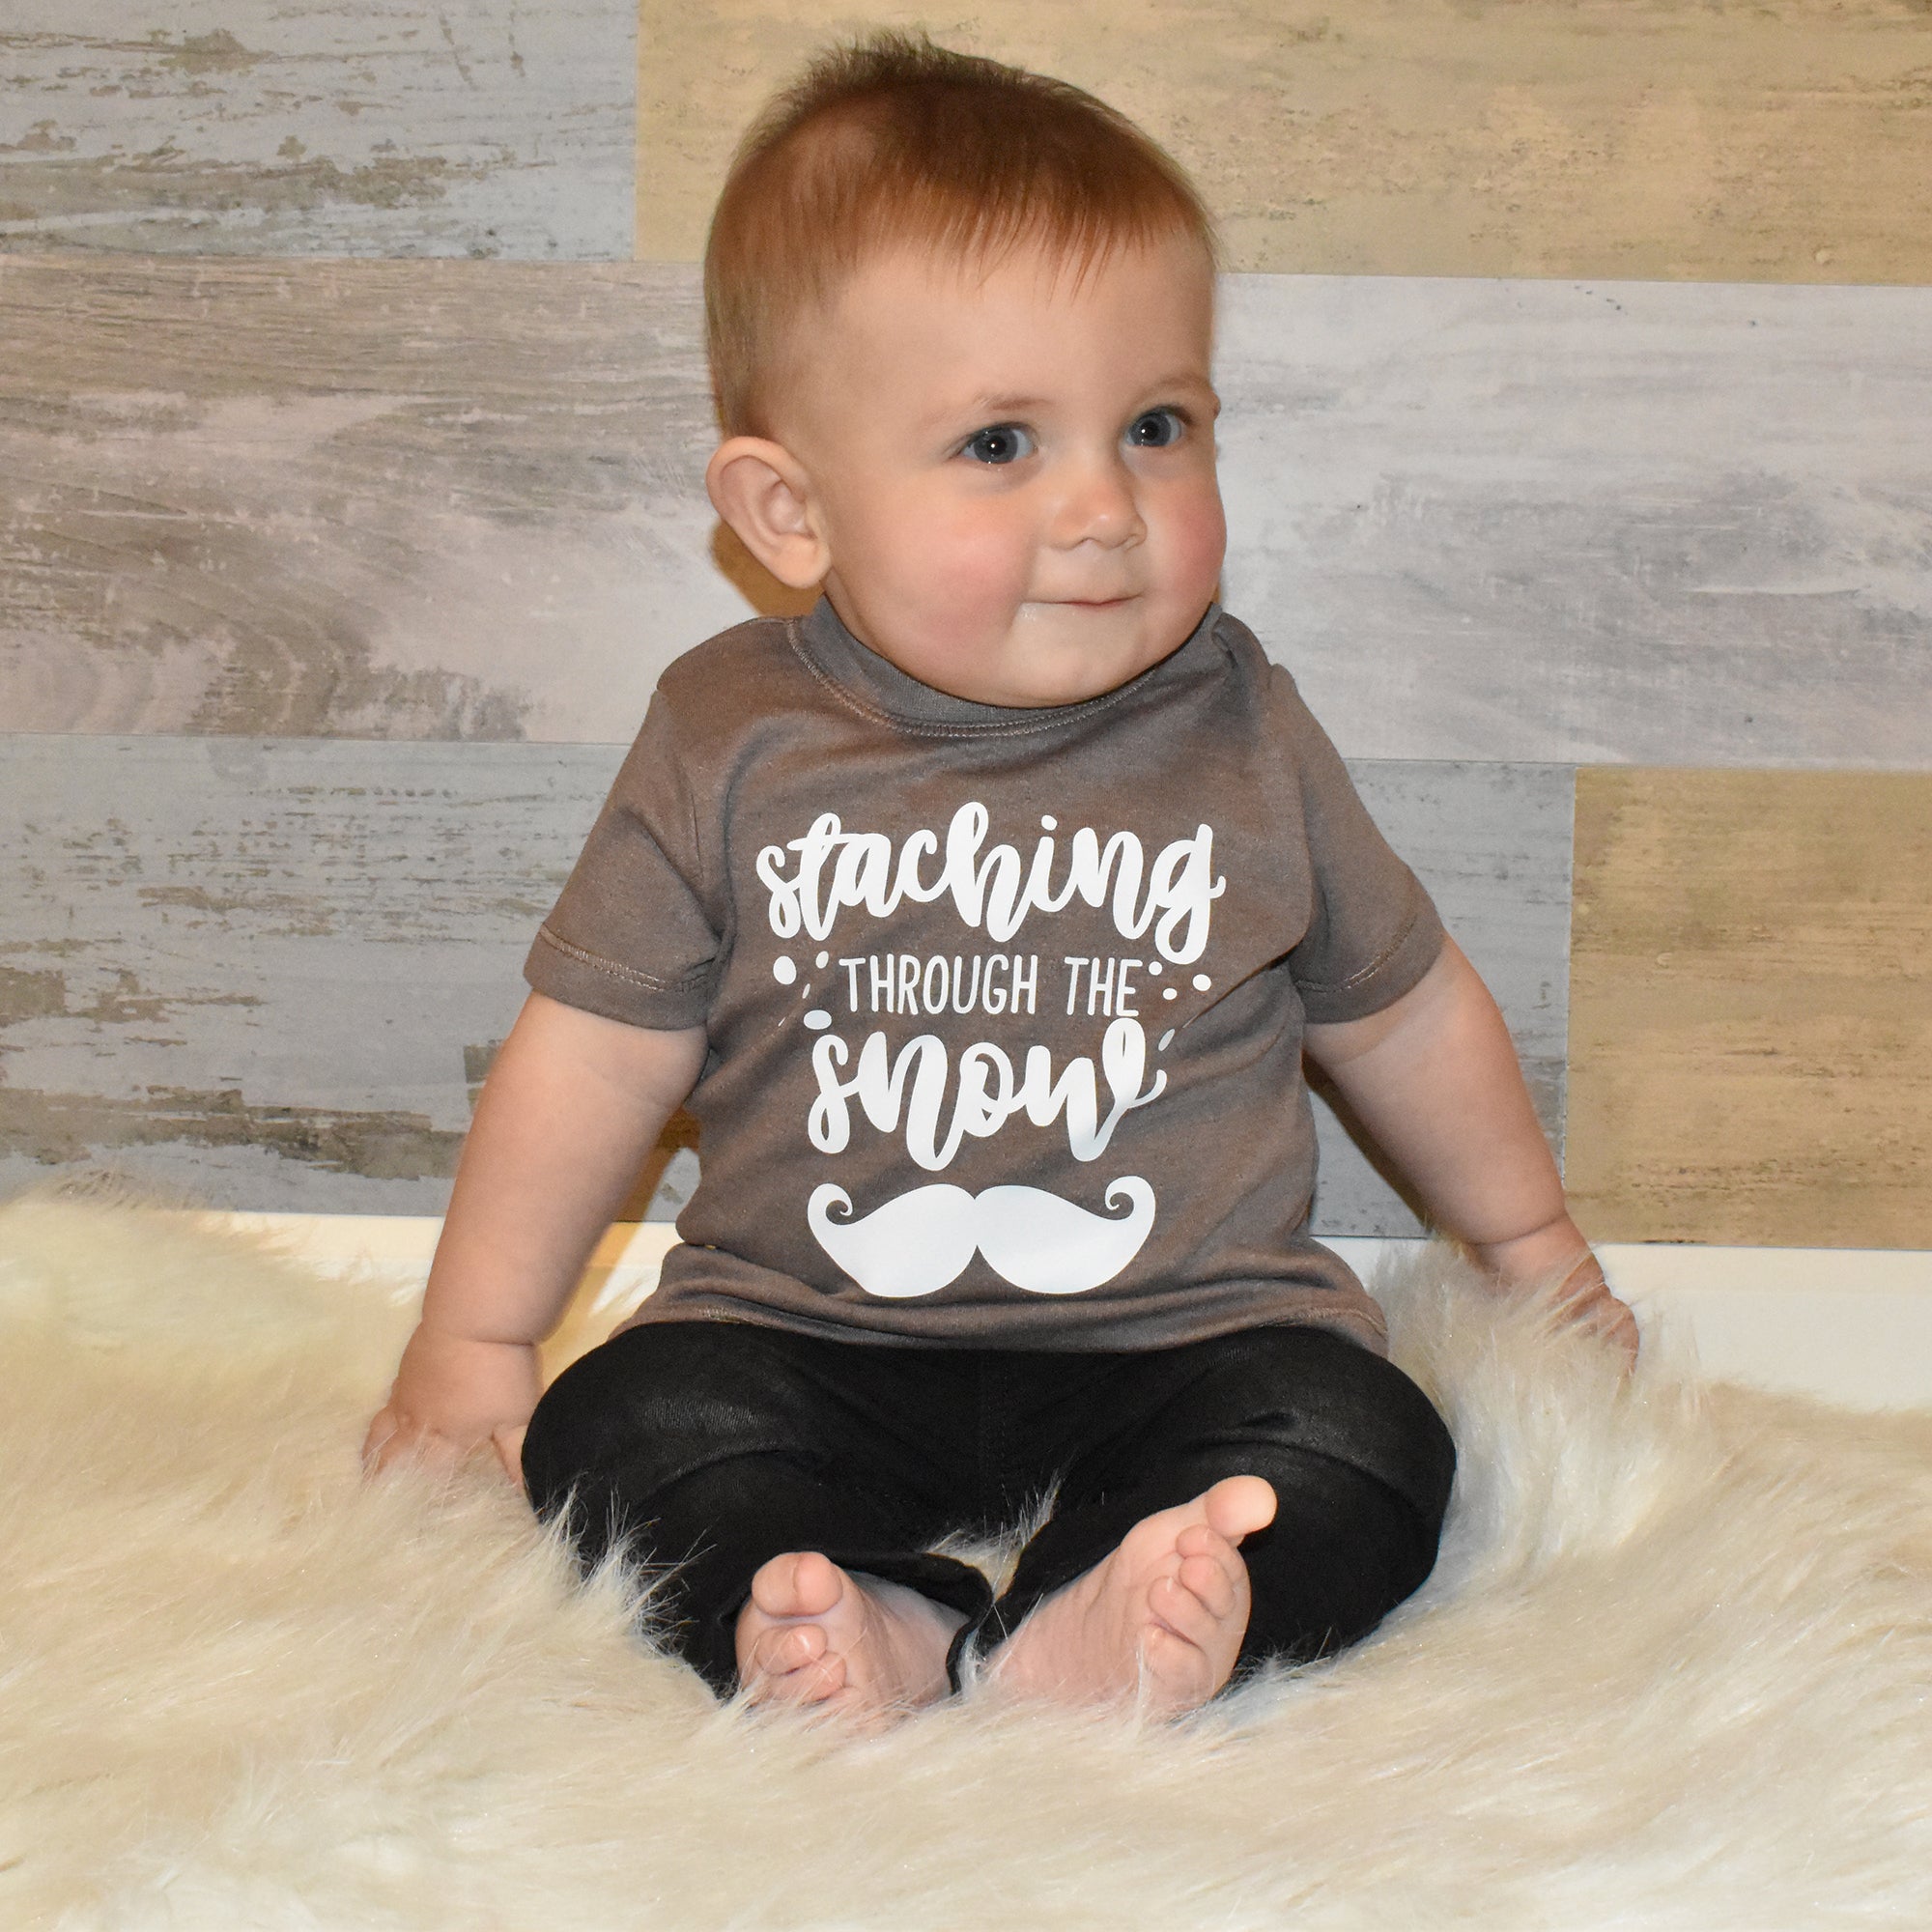 Toddler boy wearing mocha shirt, with 'Staching through the snow' print by KMLeon.